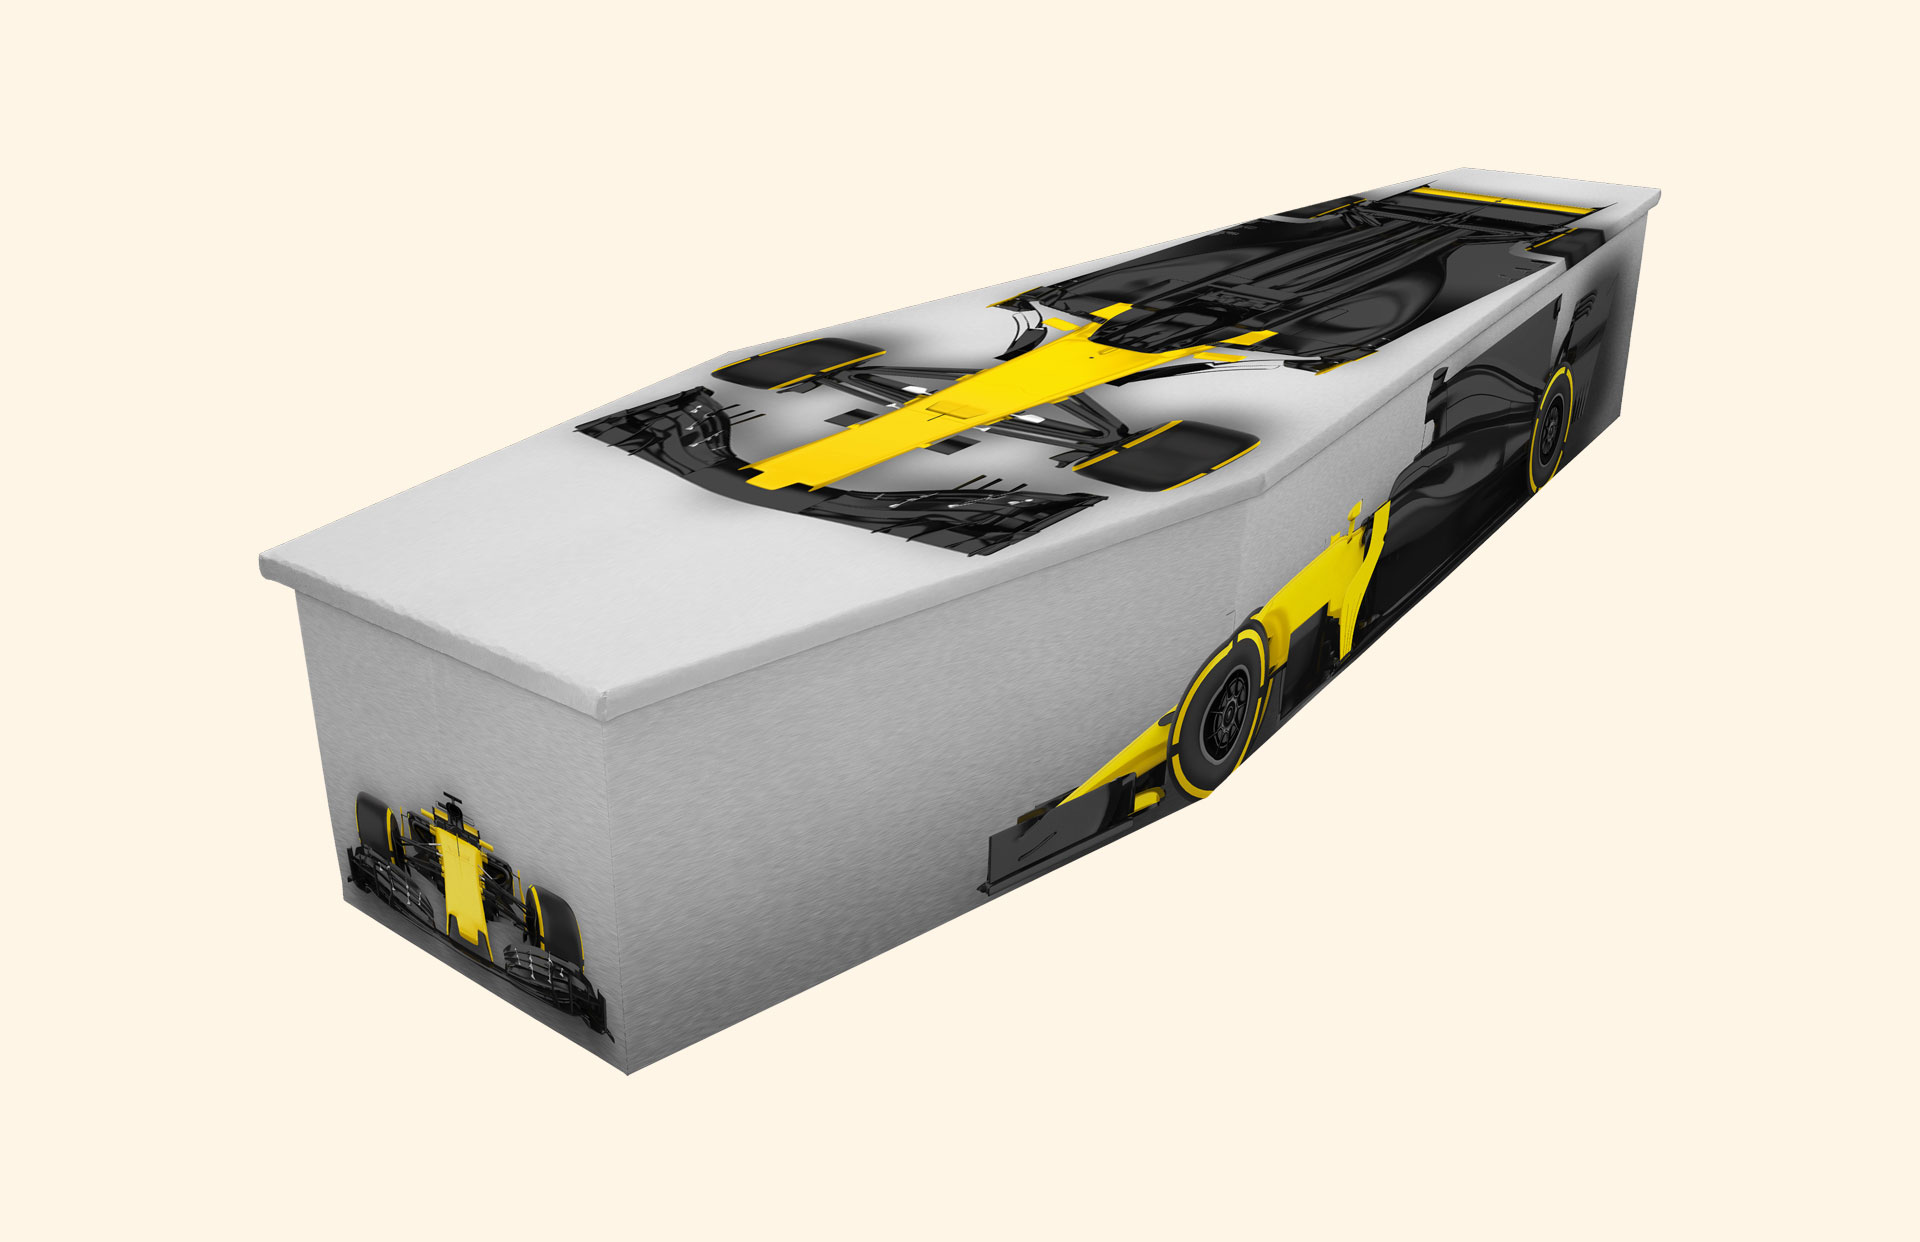 Pole Position Yellow design on a cardboard coffin